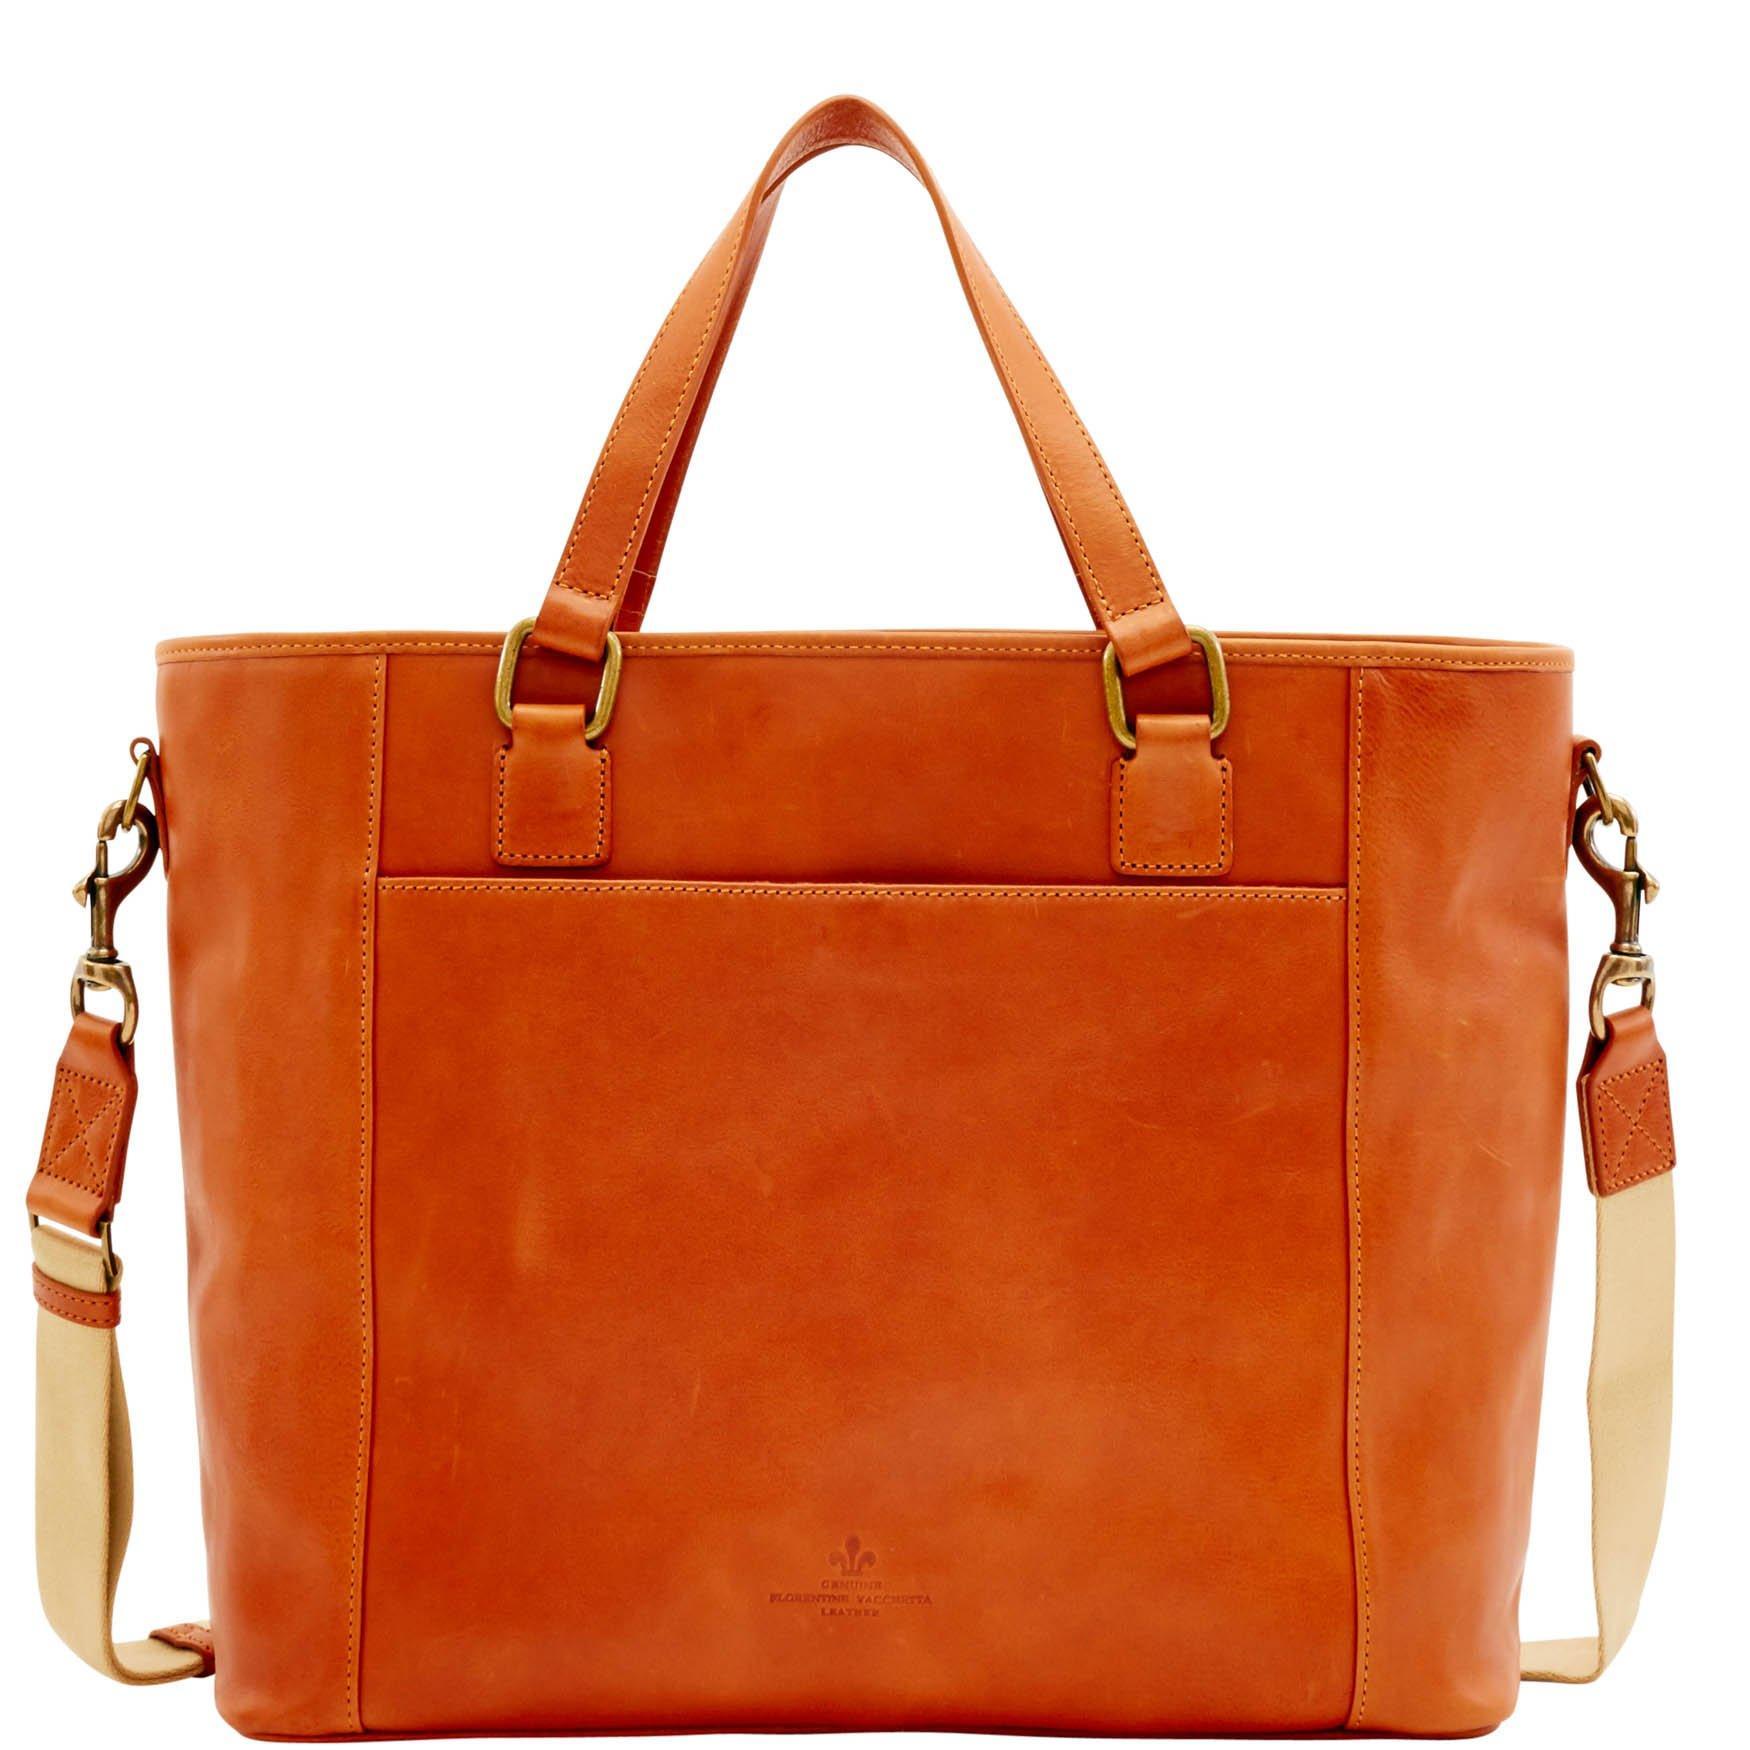 Dooney & Bourke Leather Florentine Newport Tote in Natural - Lyst